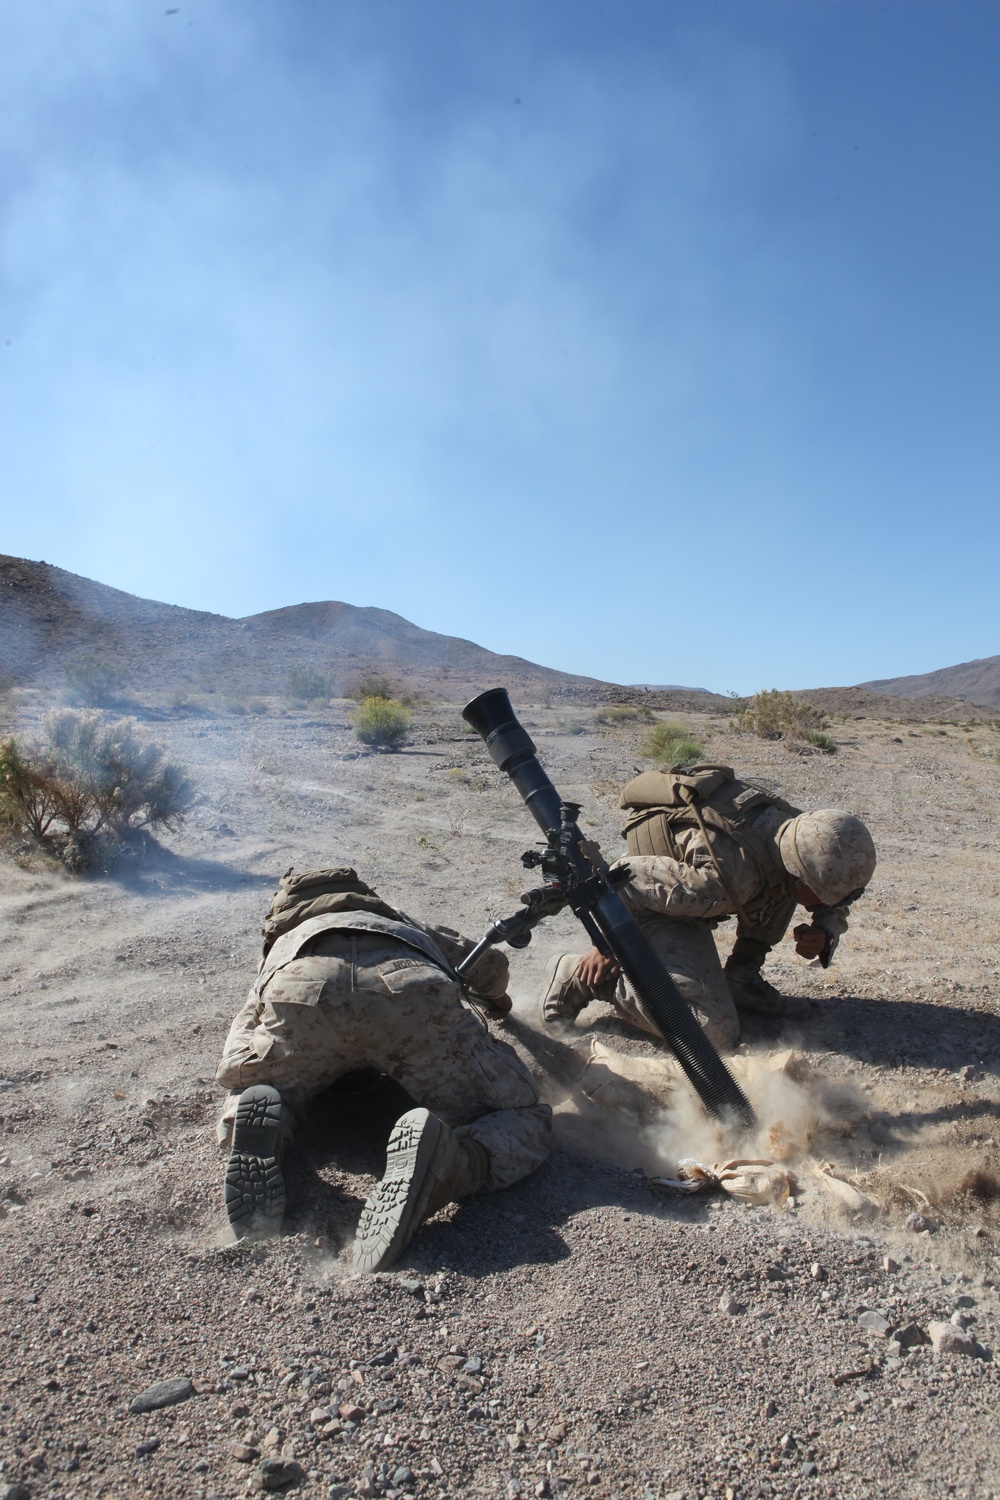 Combined-Arms raid demonstrates the Corps’ combat prowess